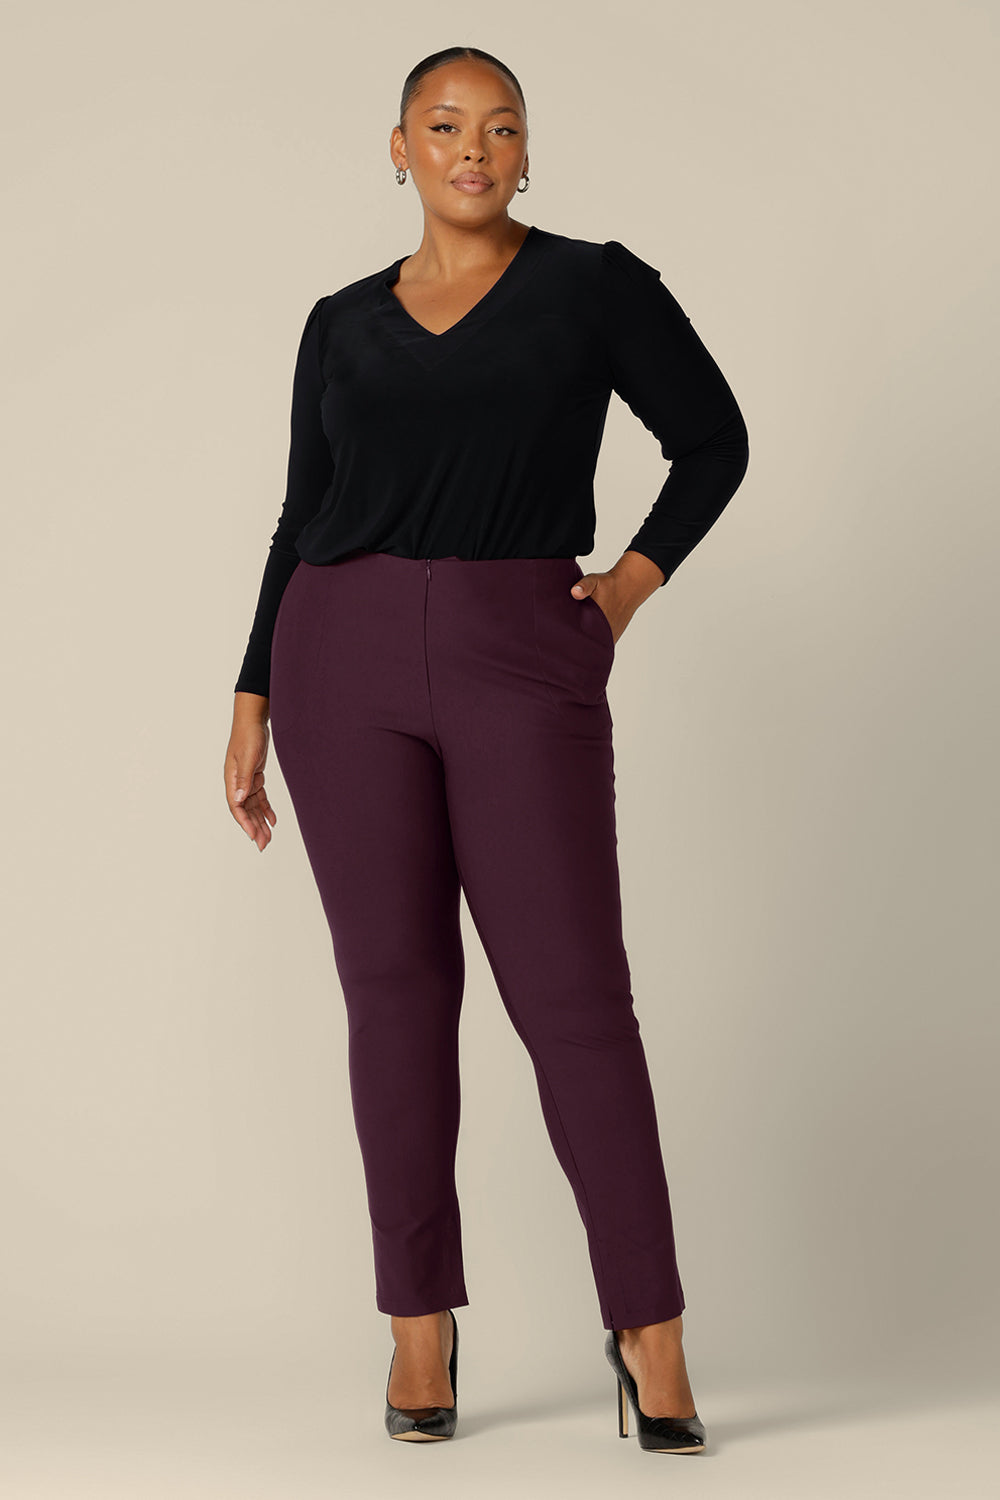 A size 18, fuller figure woman wears slim leg pants in mulberry ponte jersey by Australia and New Zealand women's clothing brand, L&F. Good pants for work, these comfortable trousers are worn with a long sleeve, V-neck top in black jersey.